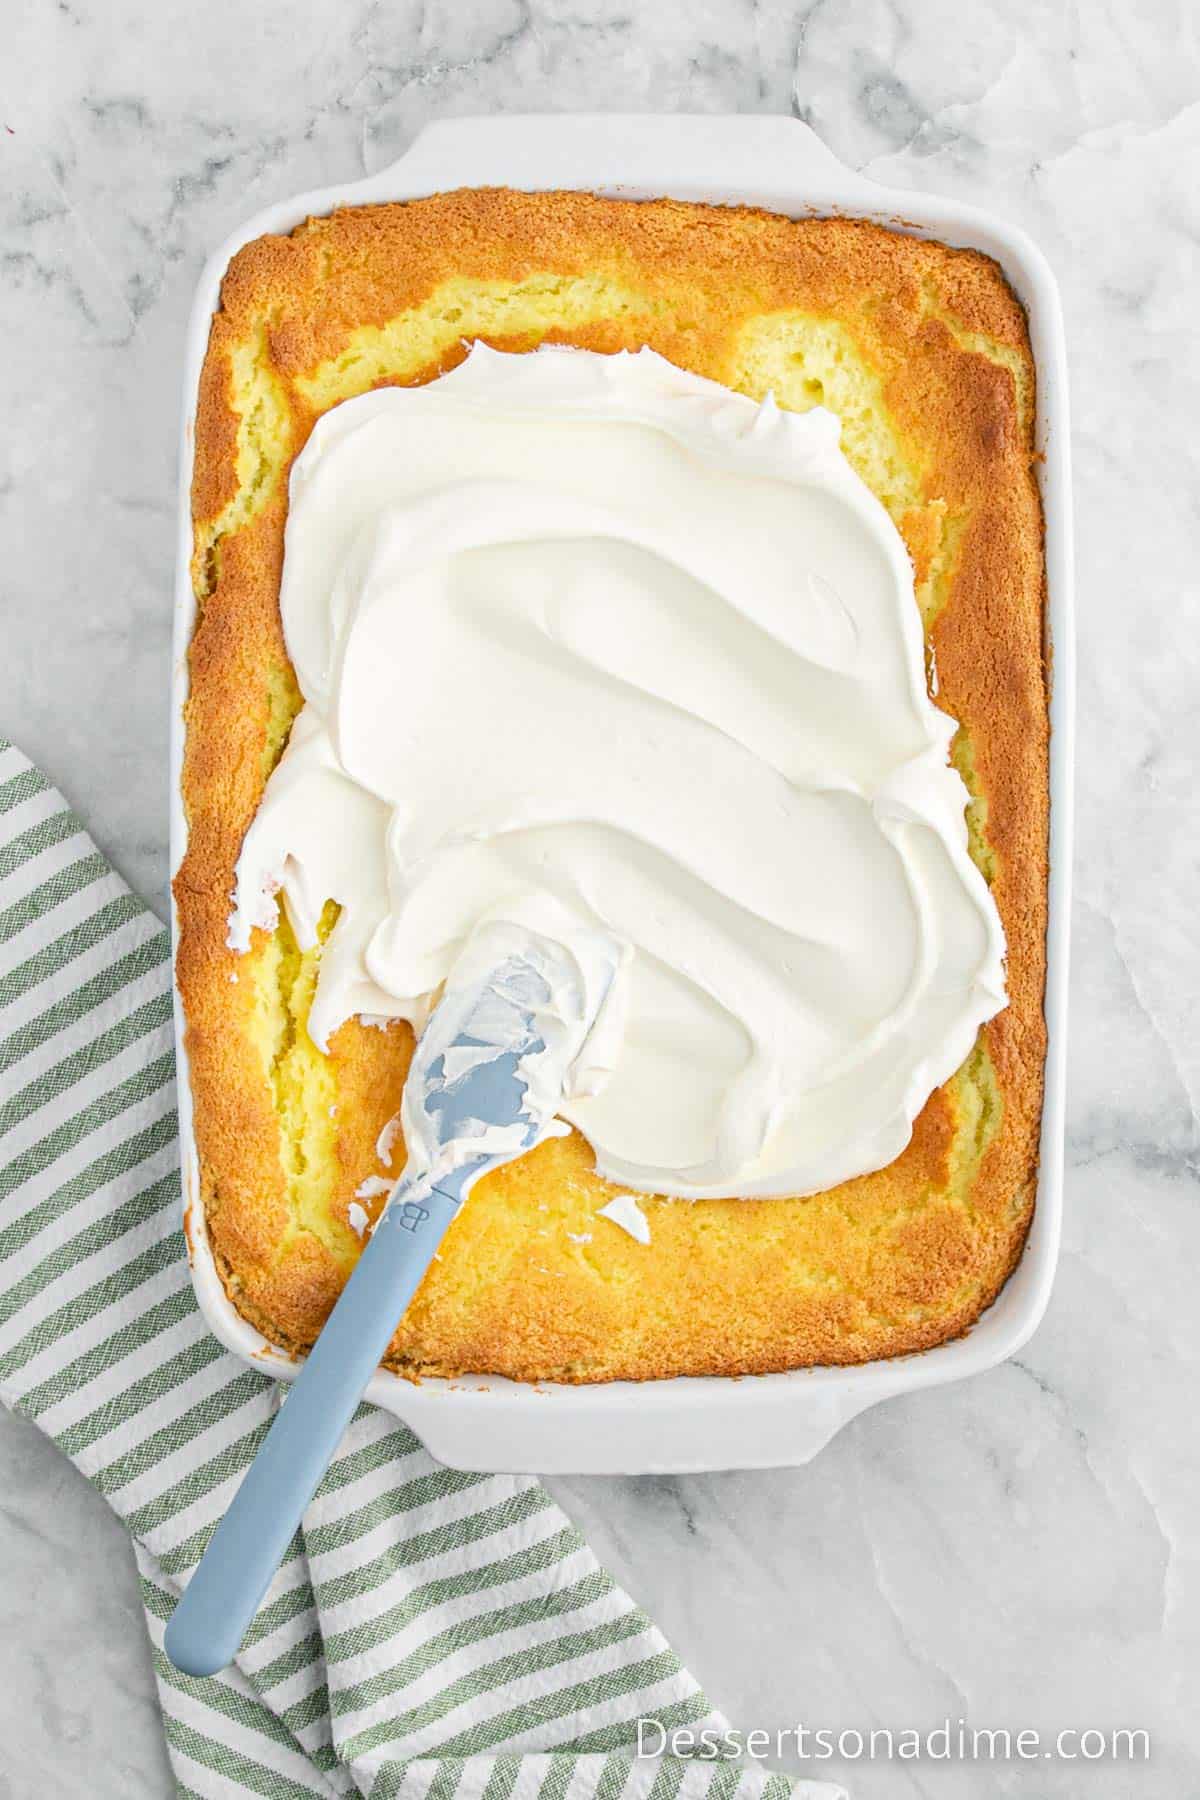 Topping the angel food cake with whipped topping